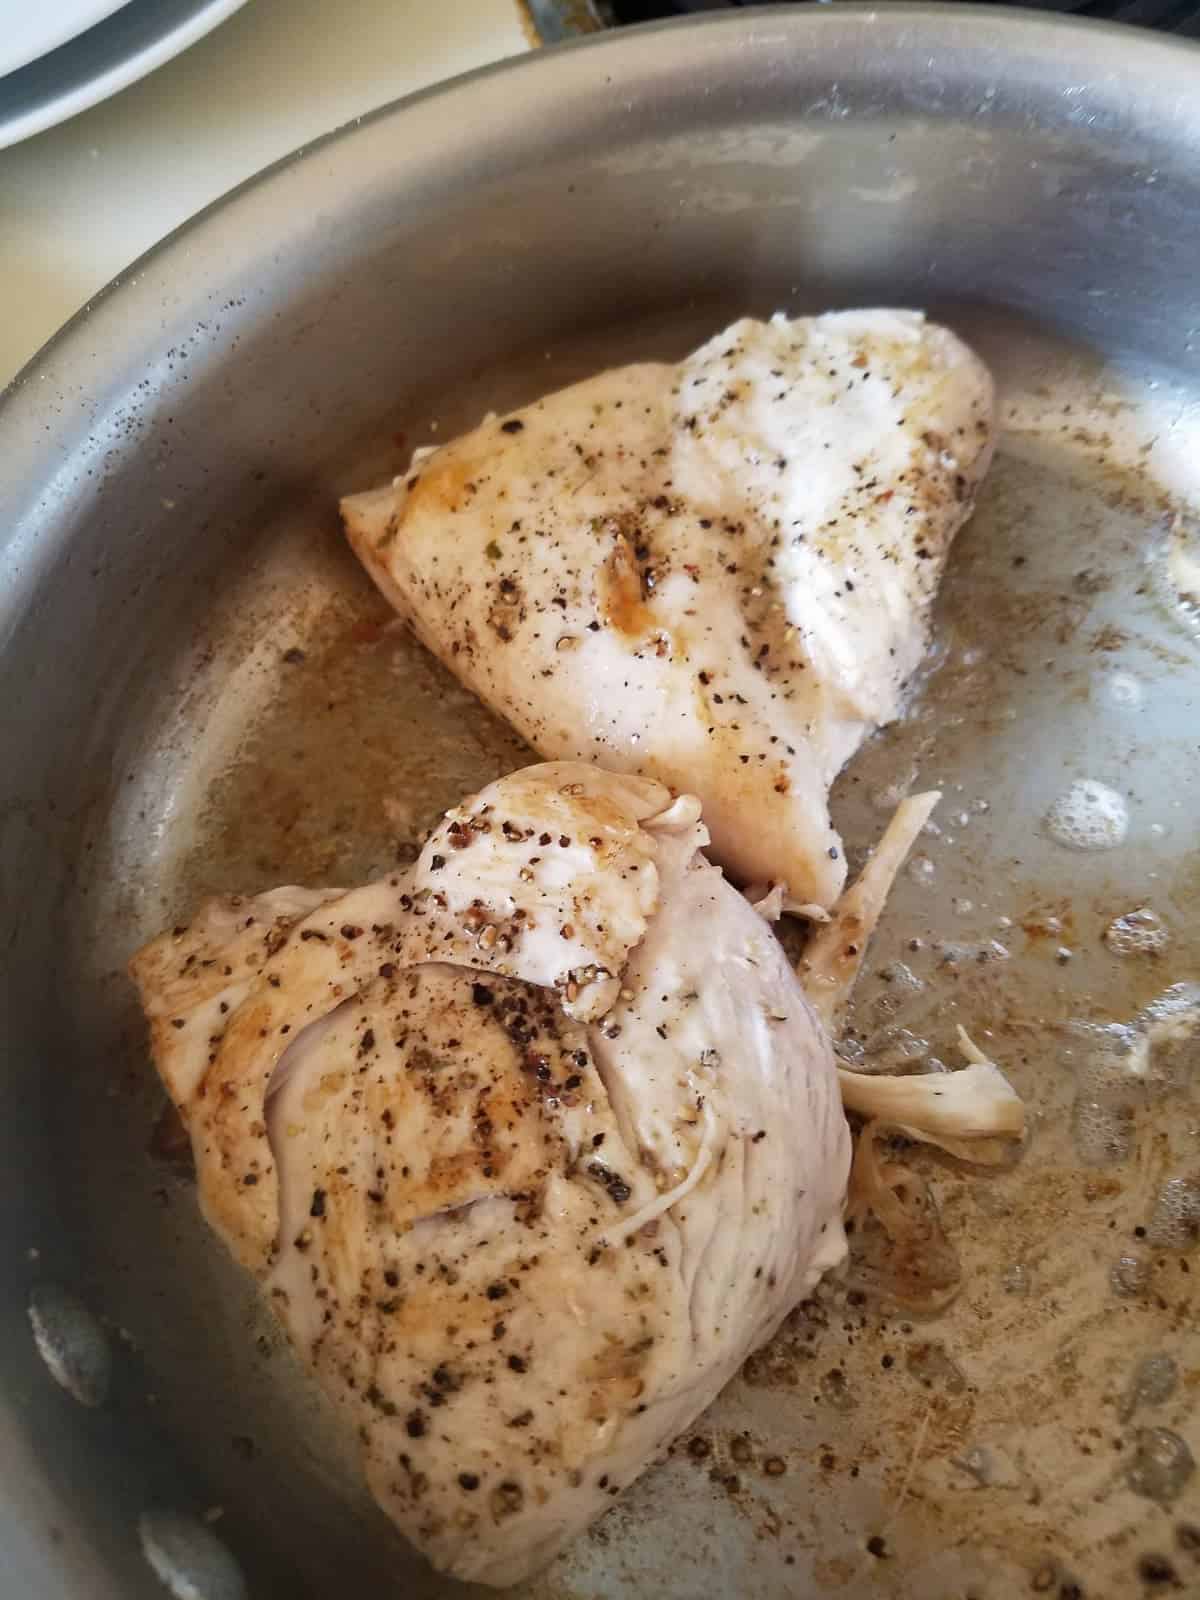 Browning two chicken breasts in saute pan on stovetop.